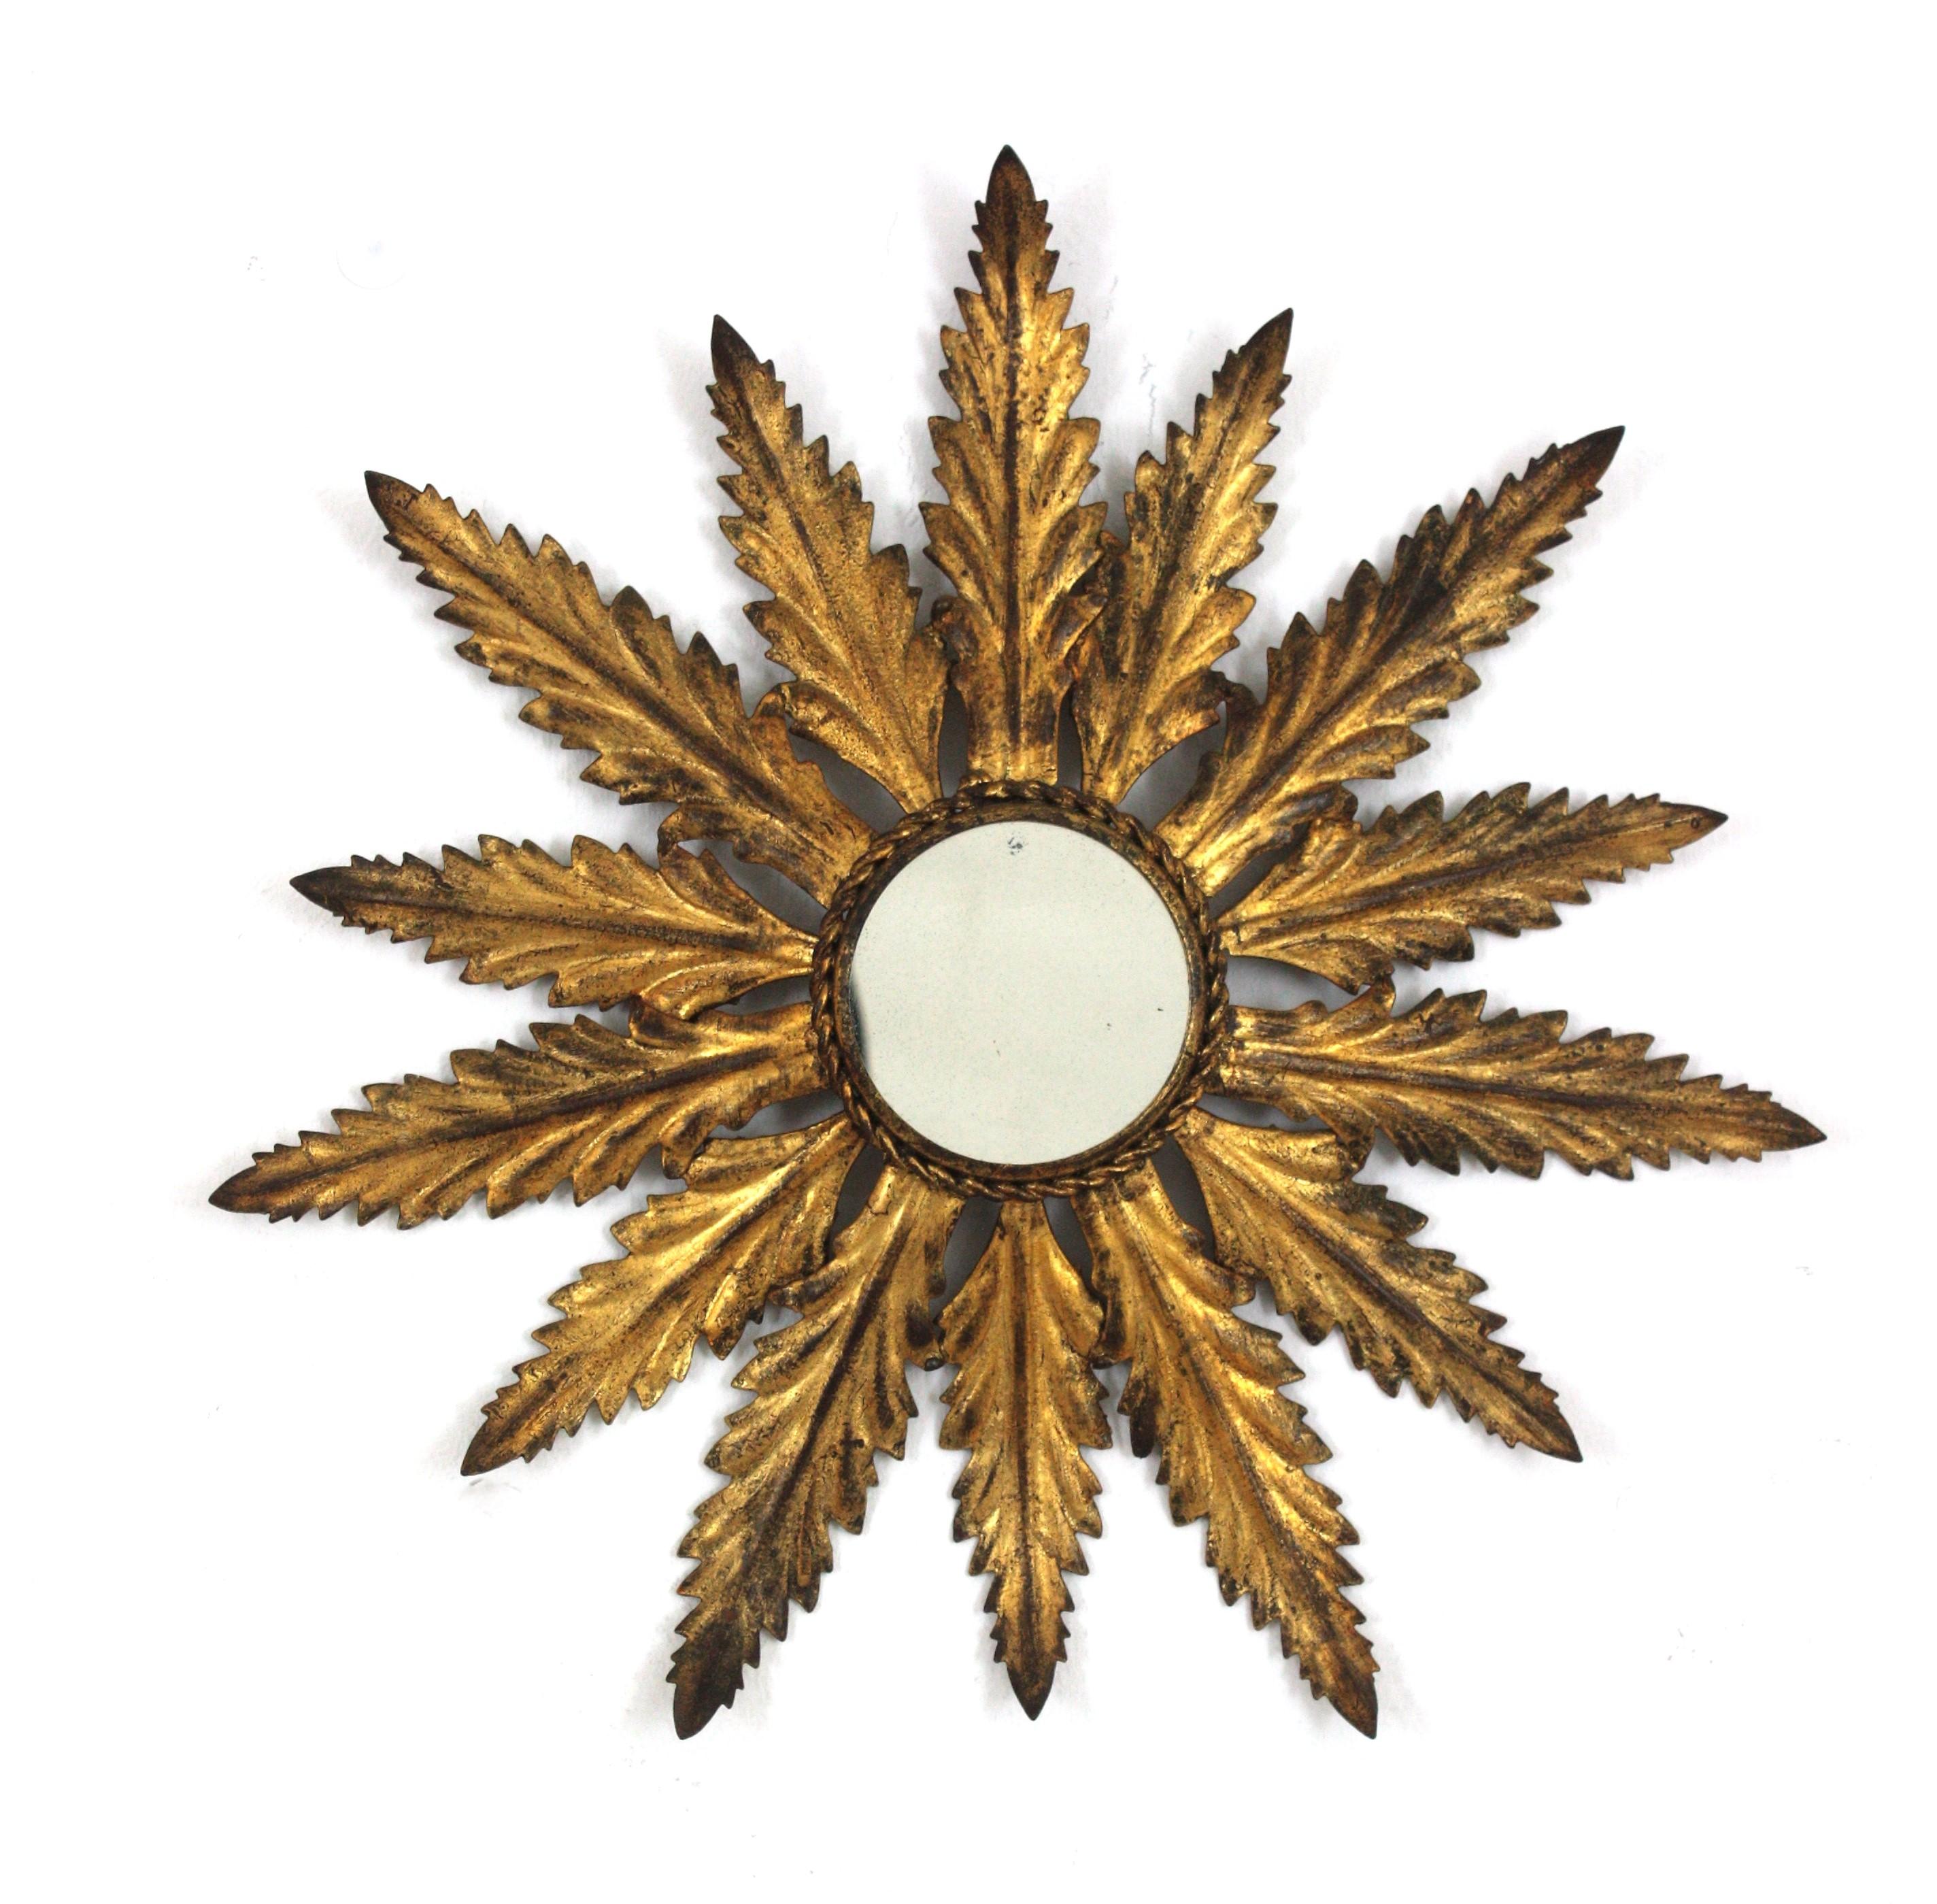 Small Sized Sunburst Mirror with Foliage Frame, Gilt Iron, Gold Leaf
Eye-catching hand-hammered gilt iron leafed sunburst mirror in small scale, Spain, 1940s-1950s.
The leafed frame in gilt iron is finished with gold leaf and retains a terrific aged